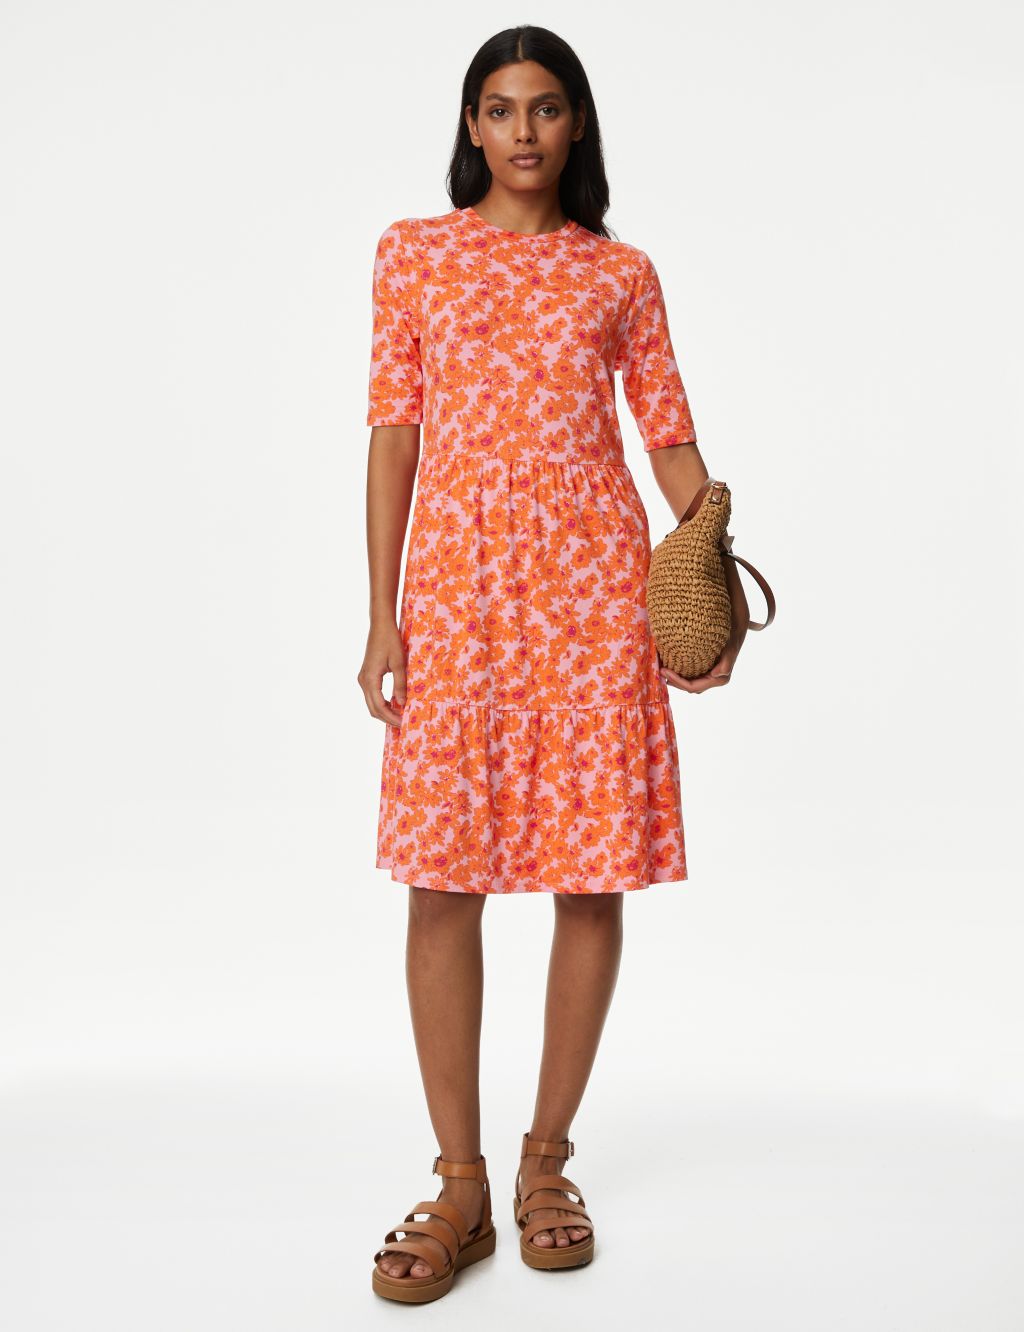 Jersey Printed Knee Length Tiered Dress image 1